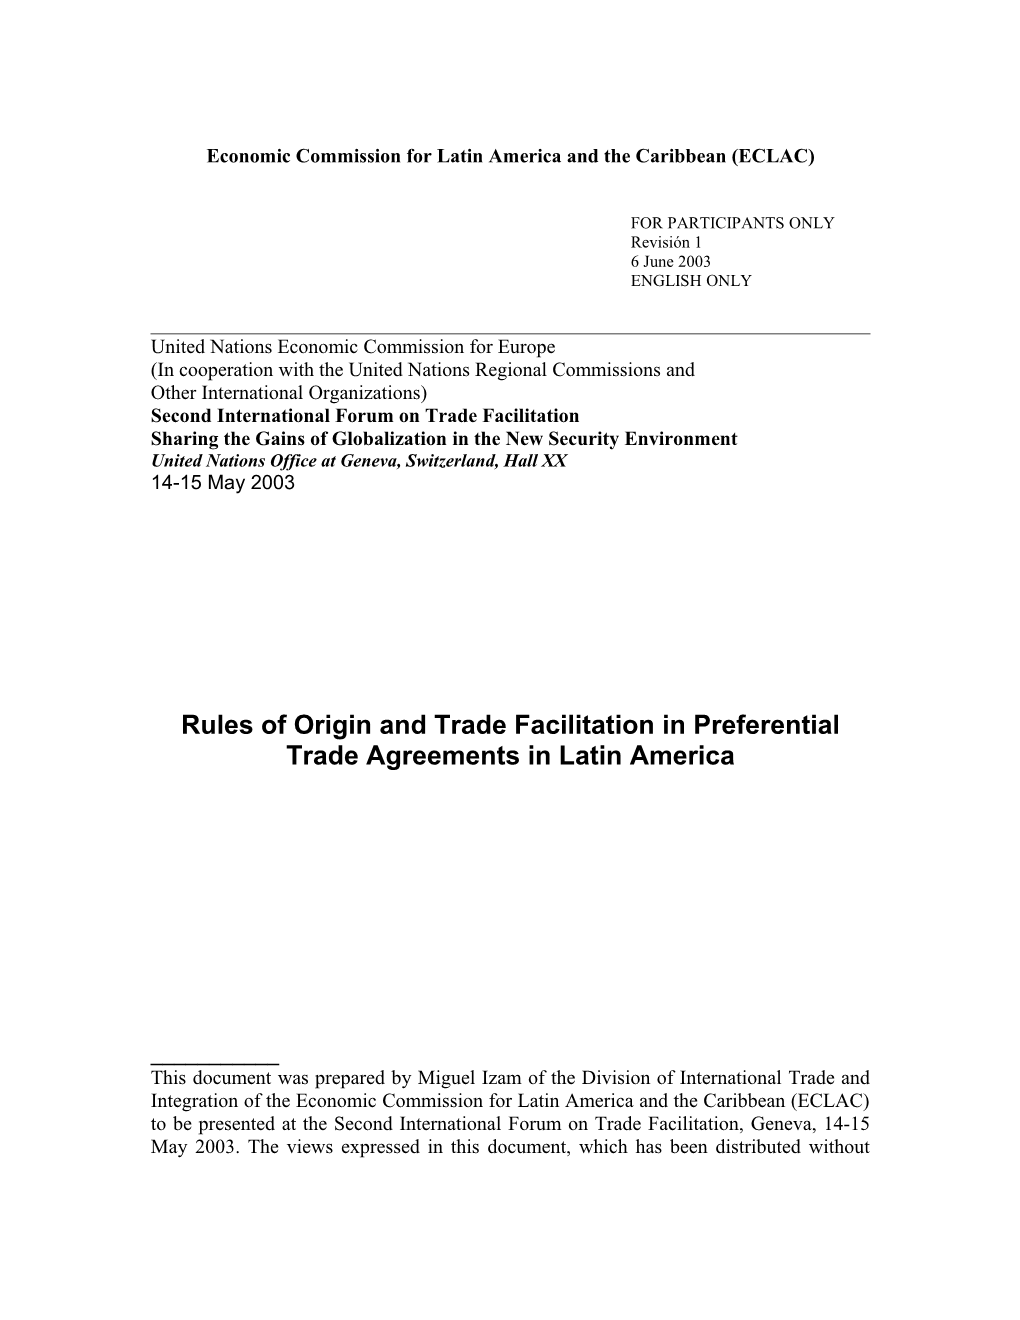 Rules of Origin in Preferential Trade Agreeements and Trade Facilitation in Latin America